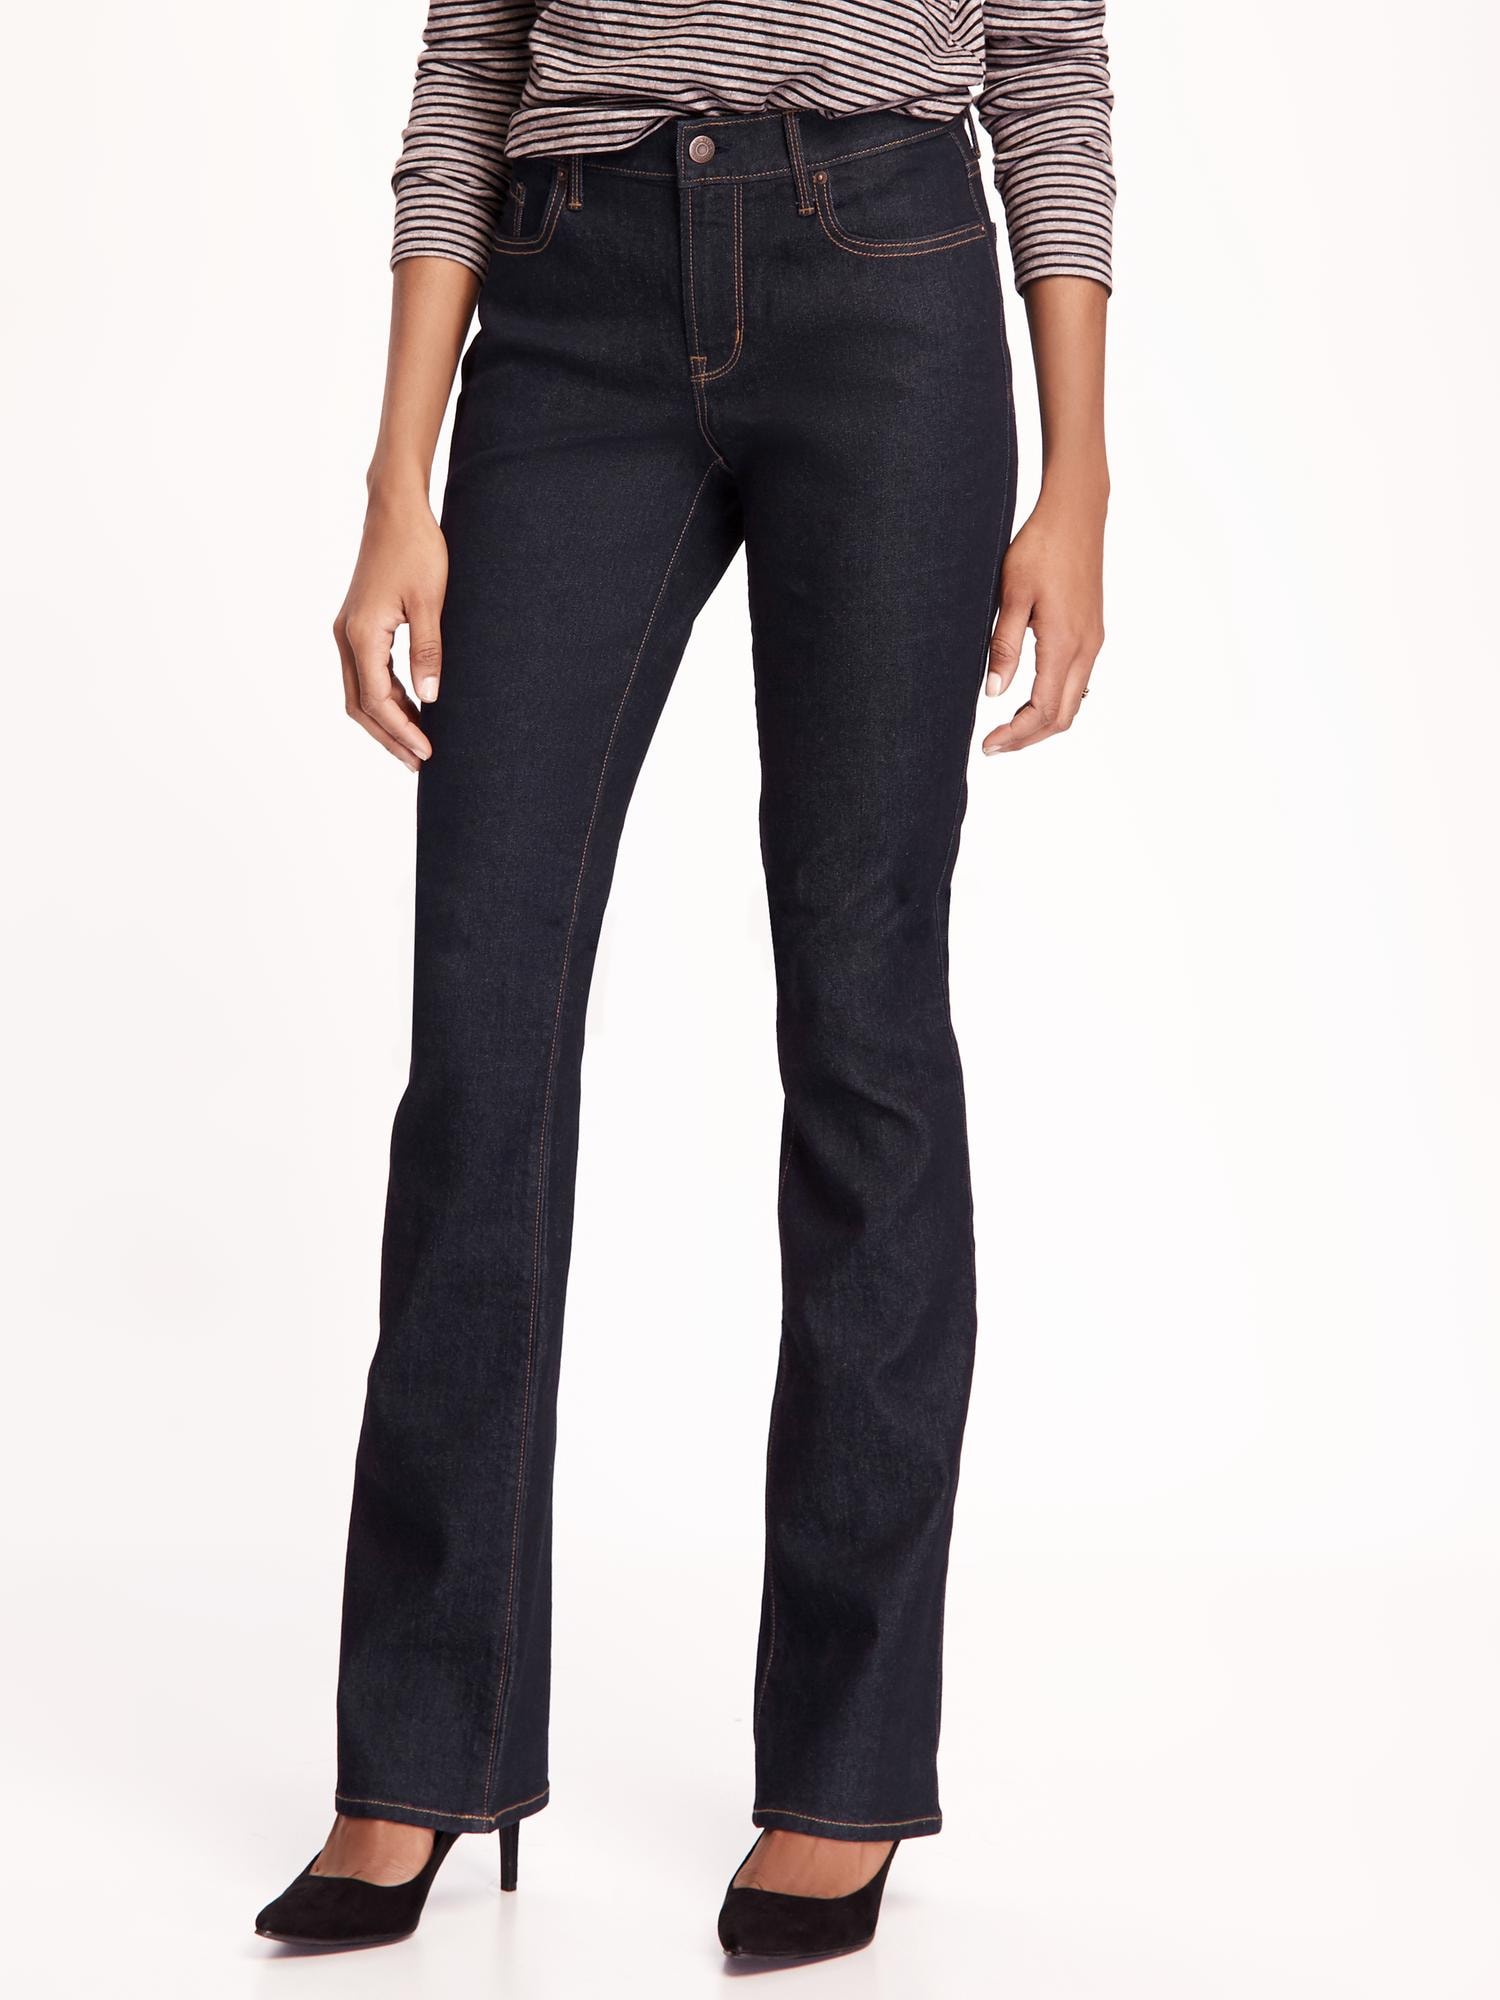 old navy black bootcut jeans